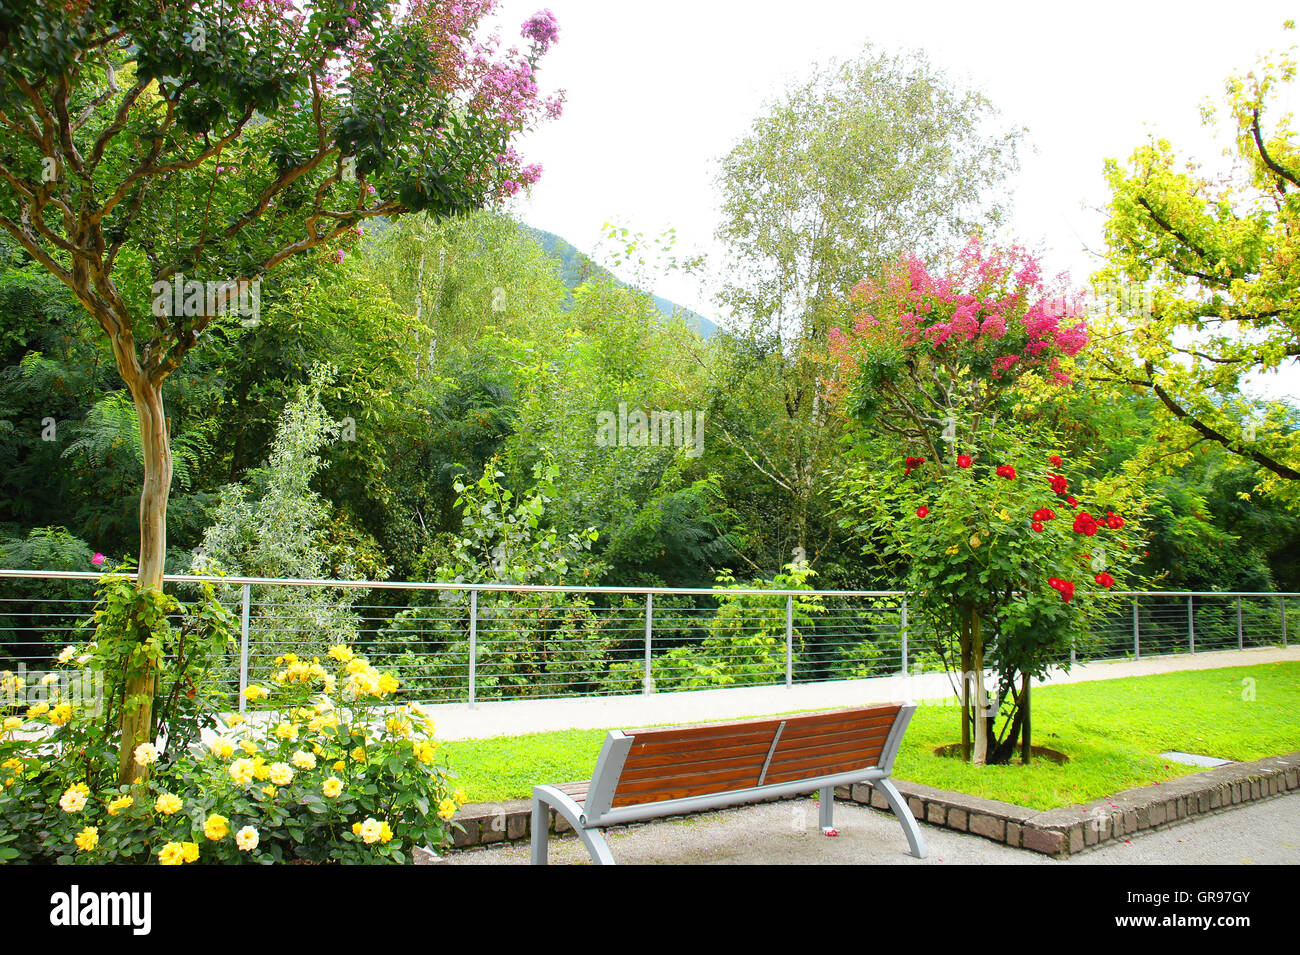 Gardens With Flowering Trees, Roses And A Bench Stock Photo